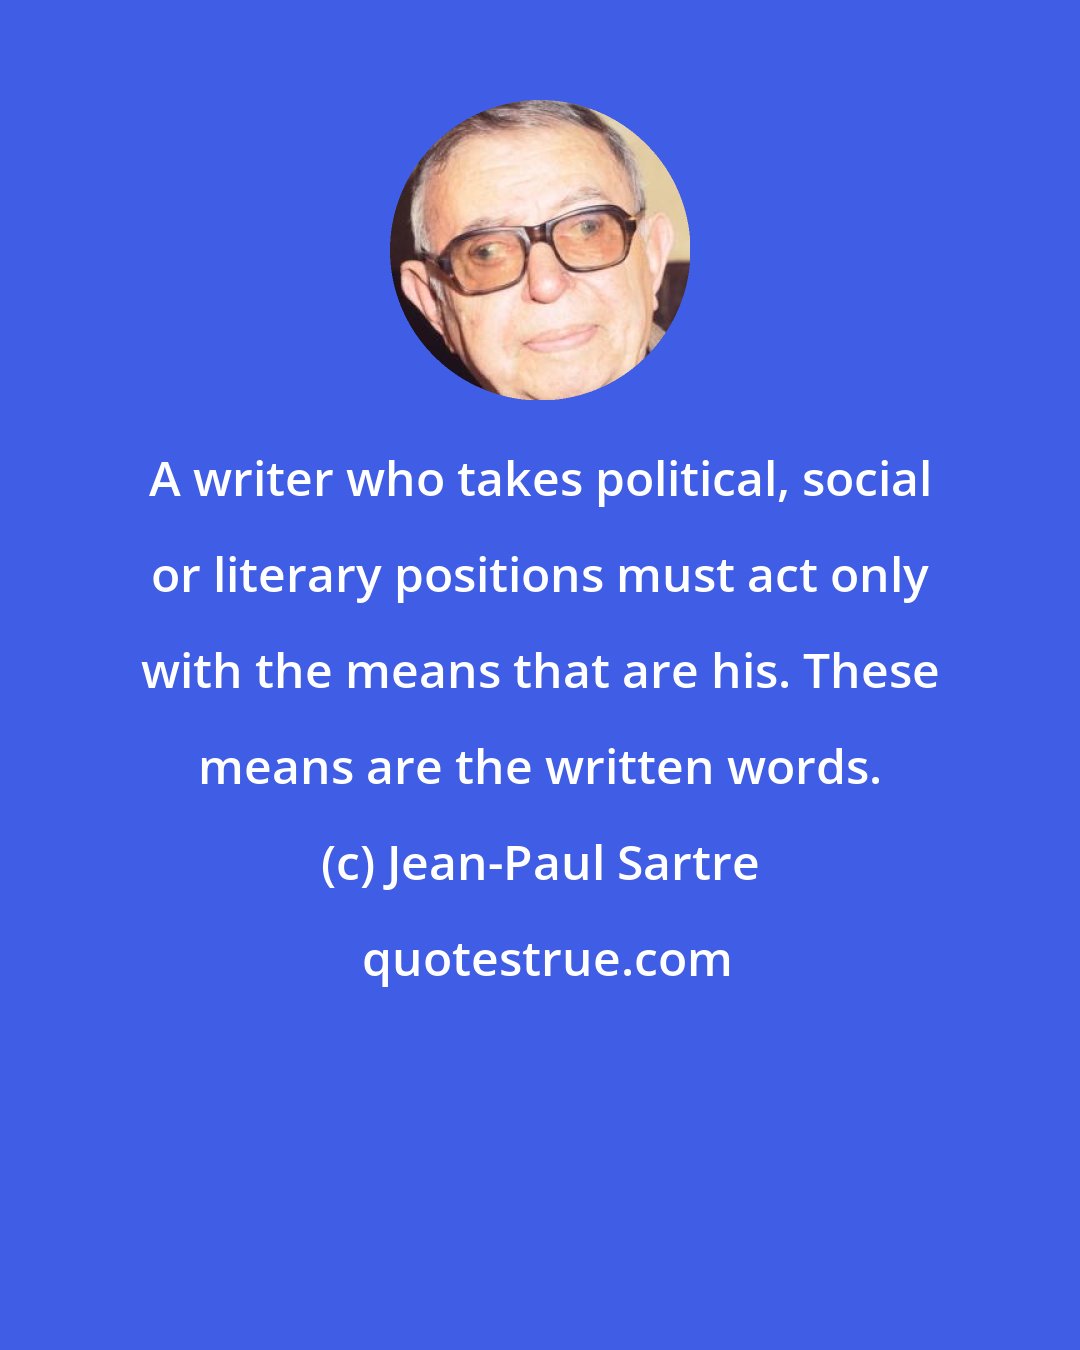 Jean-Paul Sartre: A writer who takes political, social or literary positions must act only with the means that are his. These means are the written words.